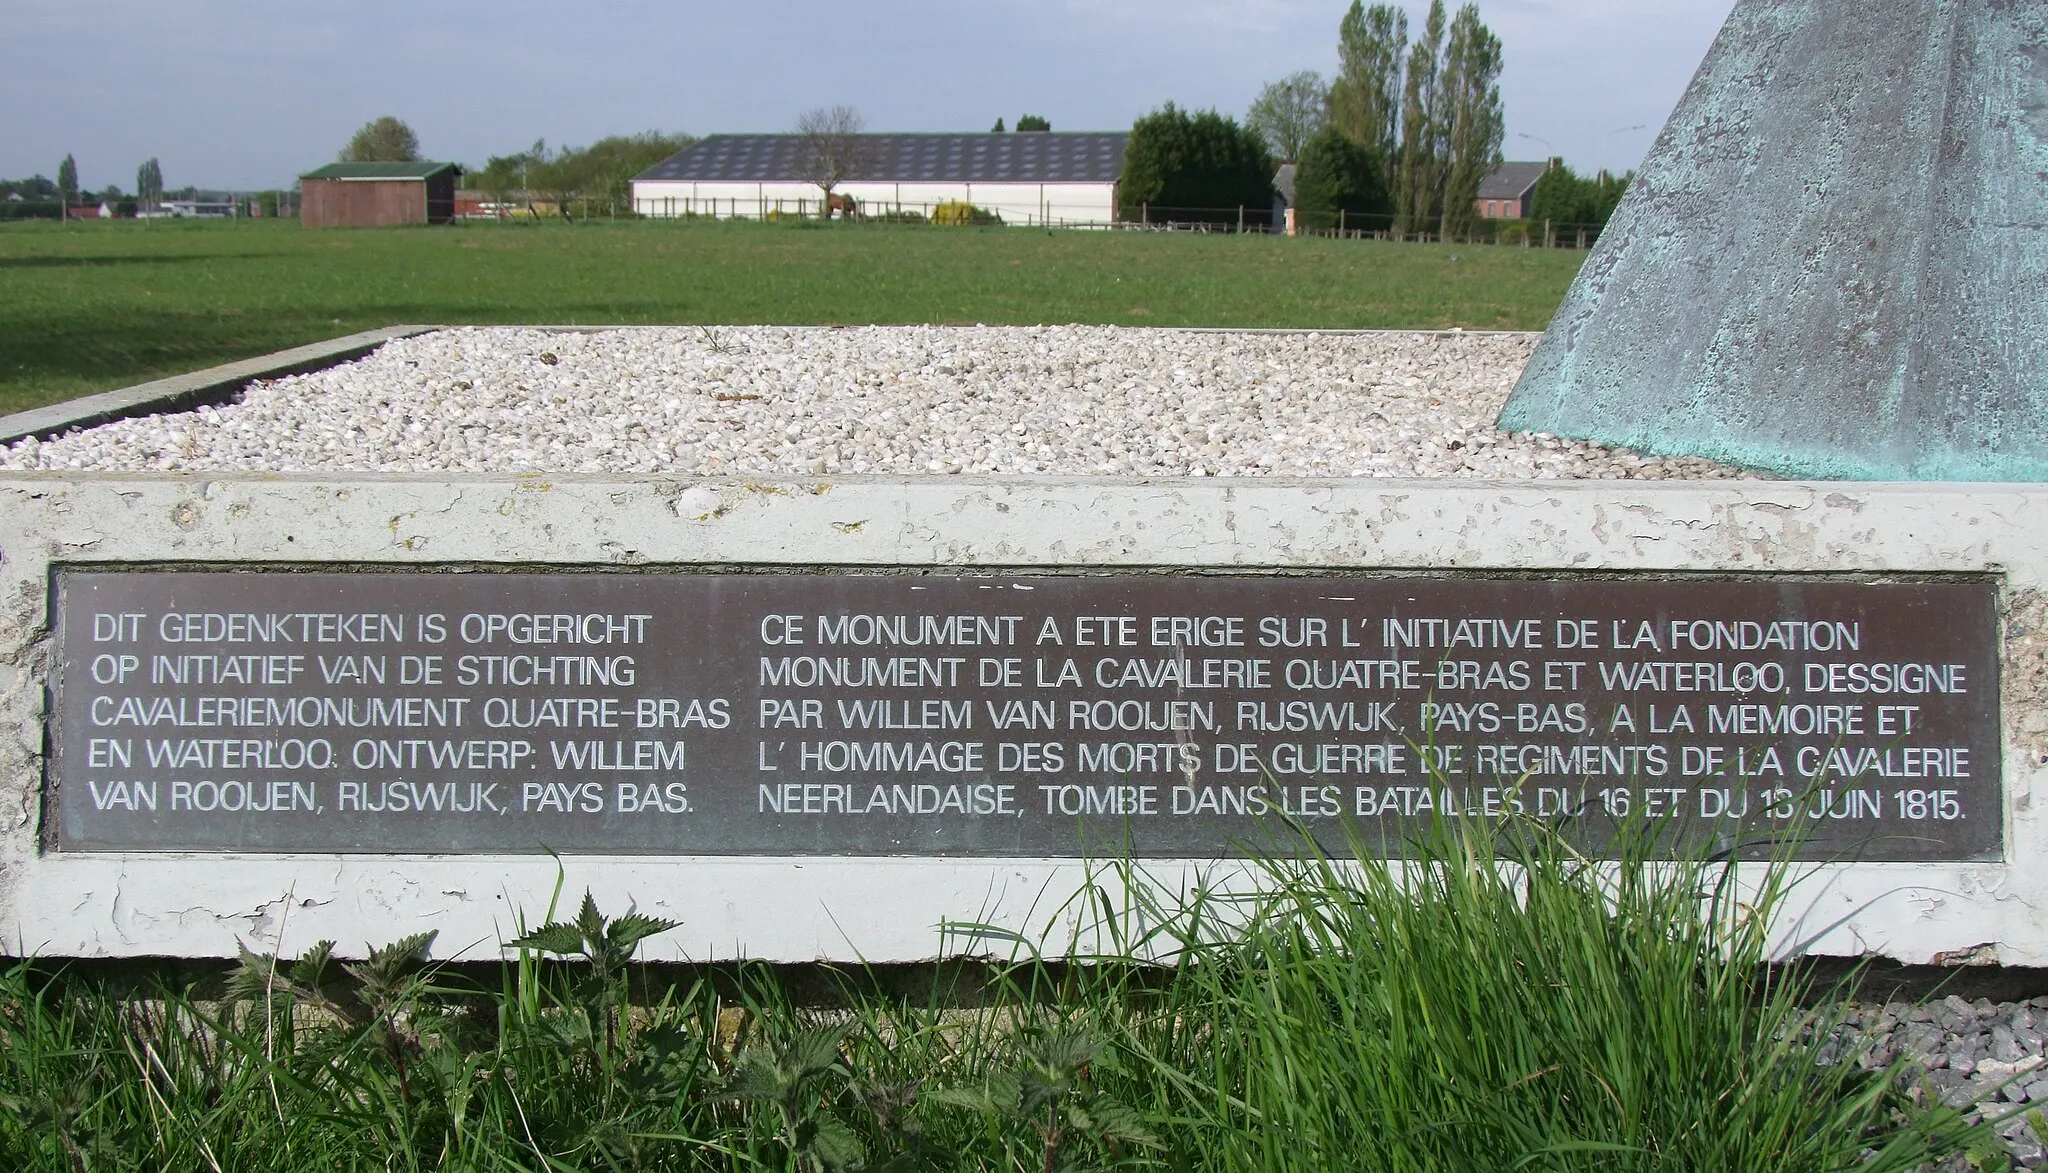 Photo showing: Description of the monument : ►(File:18 June 1815 – Victory at Waterloo – To the Dutch & Belgian Cavalry.jpg). Translation (of the text in Dutch) : This memorial was erected on the initiative of the foundation Cavalry Monument Quatre-Bras en Waterloo. Design: Willem van Rooijen, Rijswijk, The Netherlands.